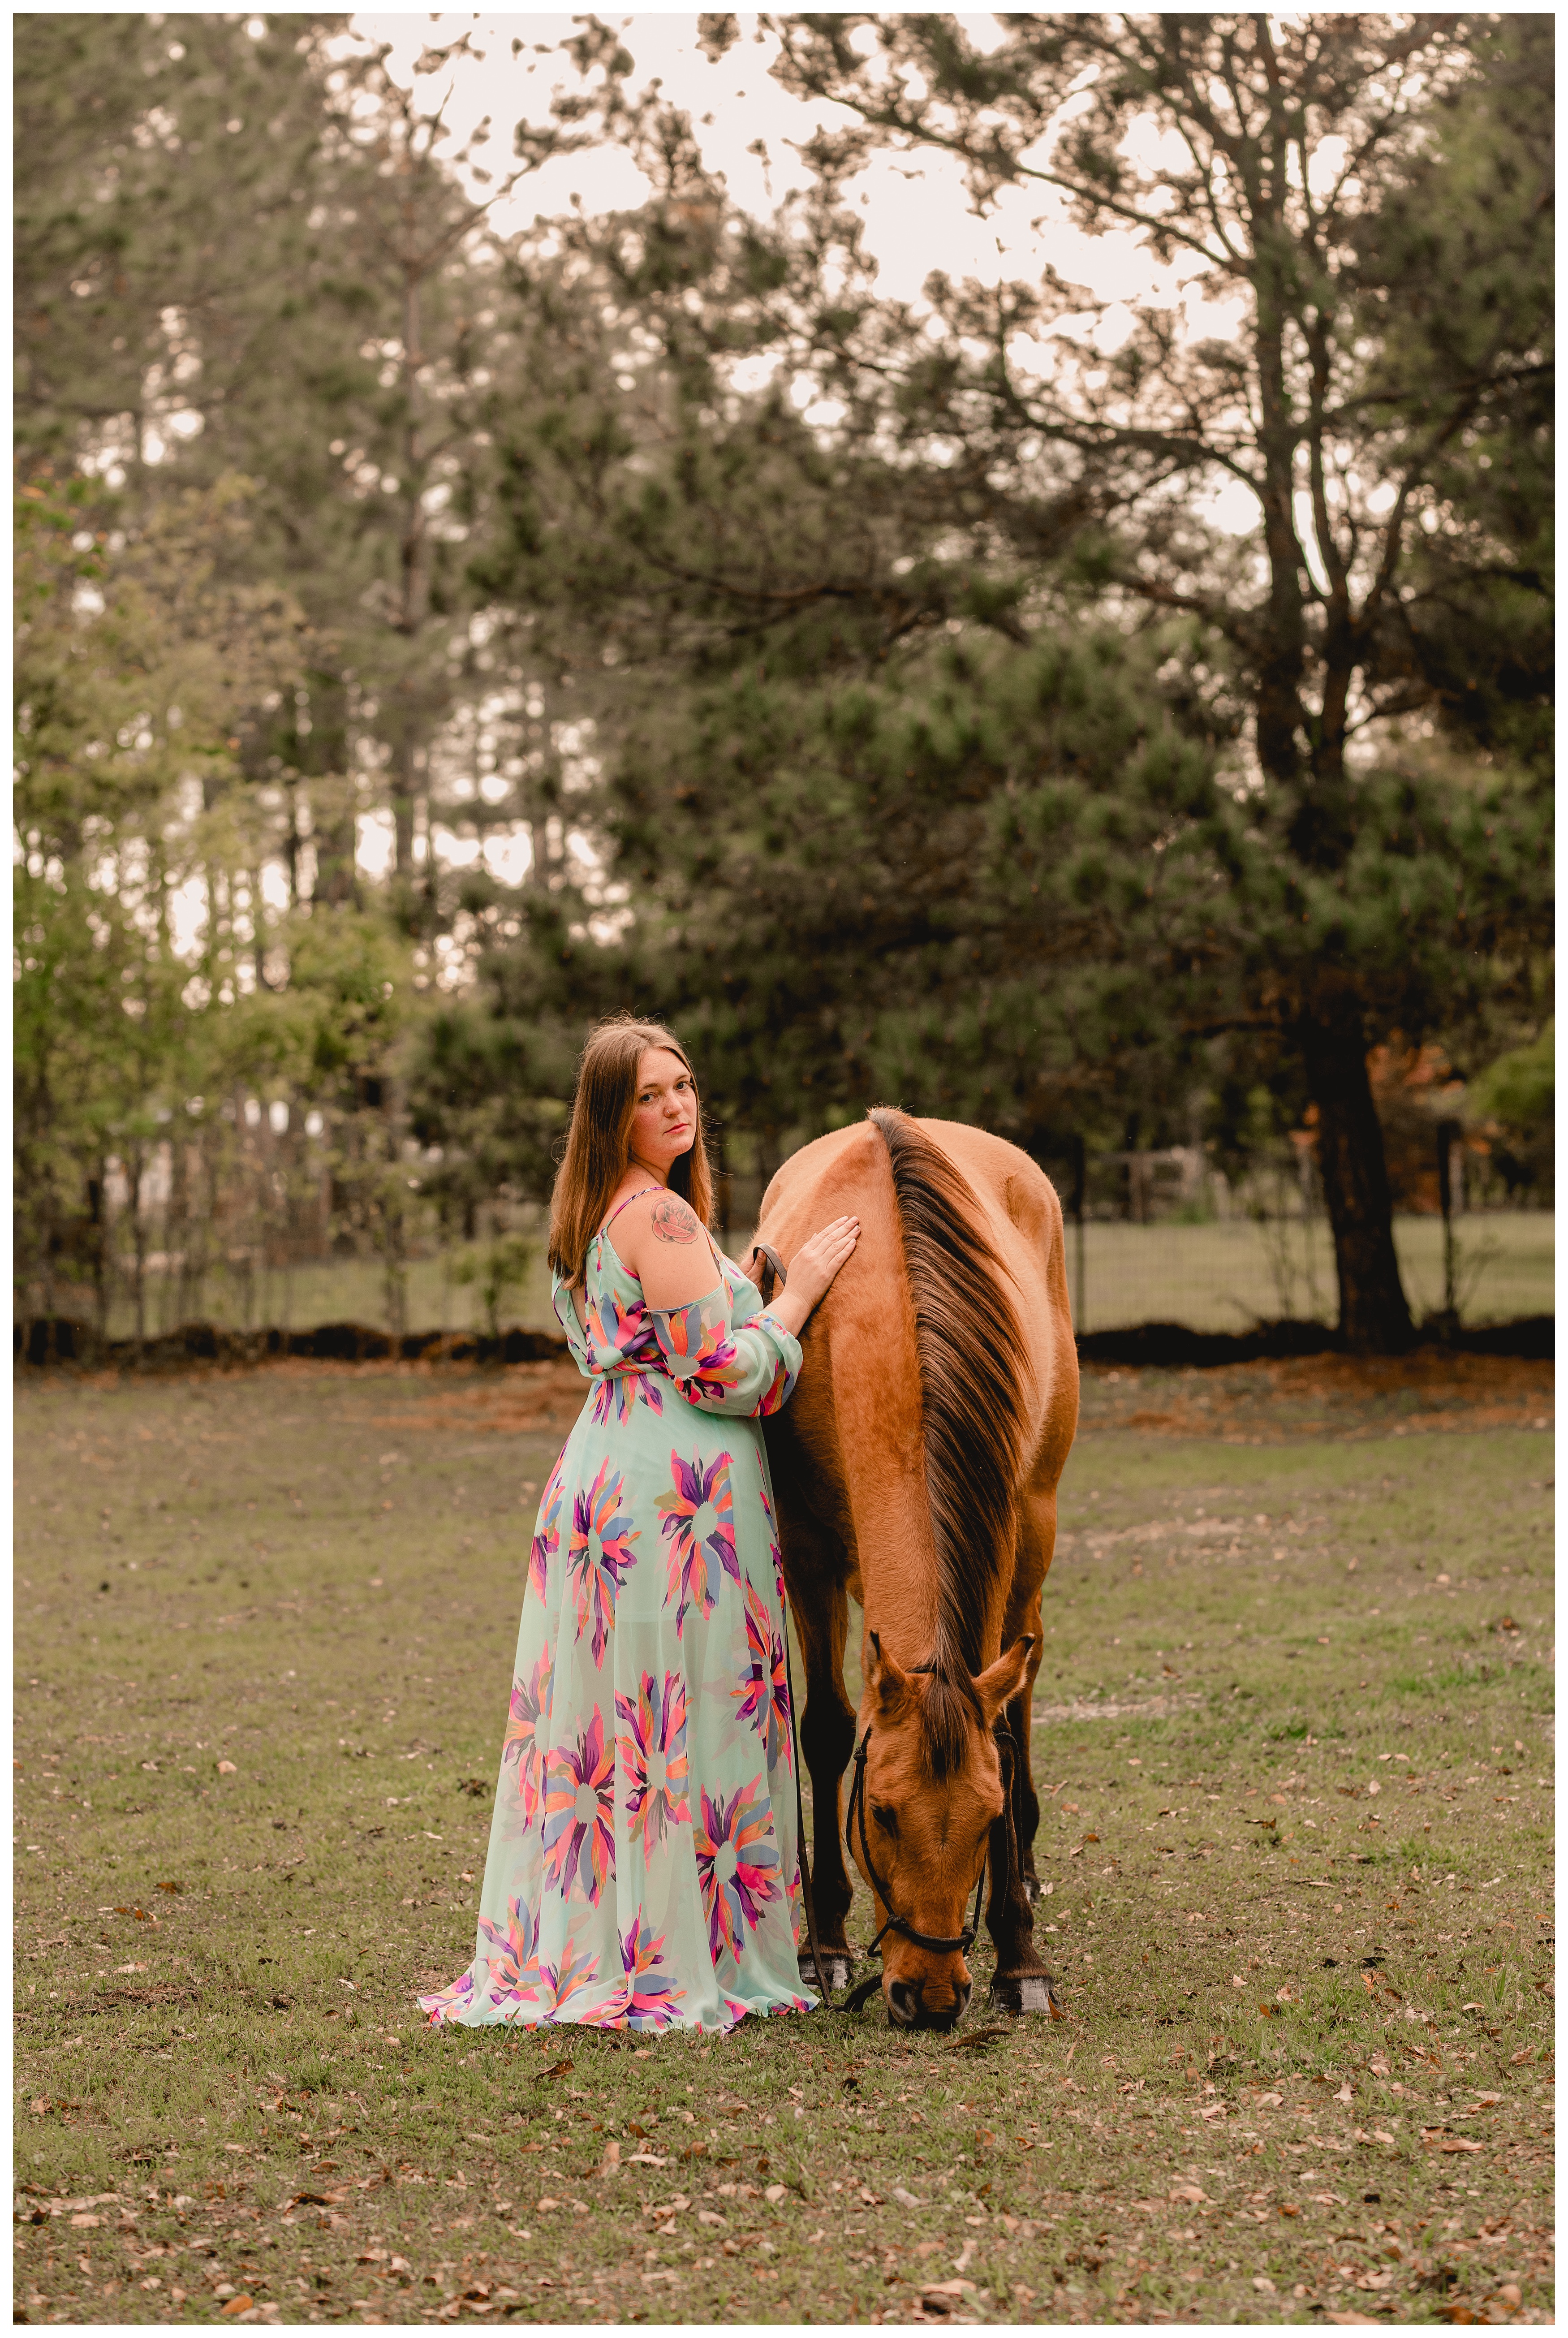 Florida horse photographer specializing in lifestyle and intimate moments between horse and rider. Shelly Williams Photography